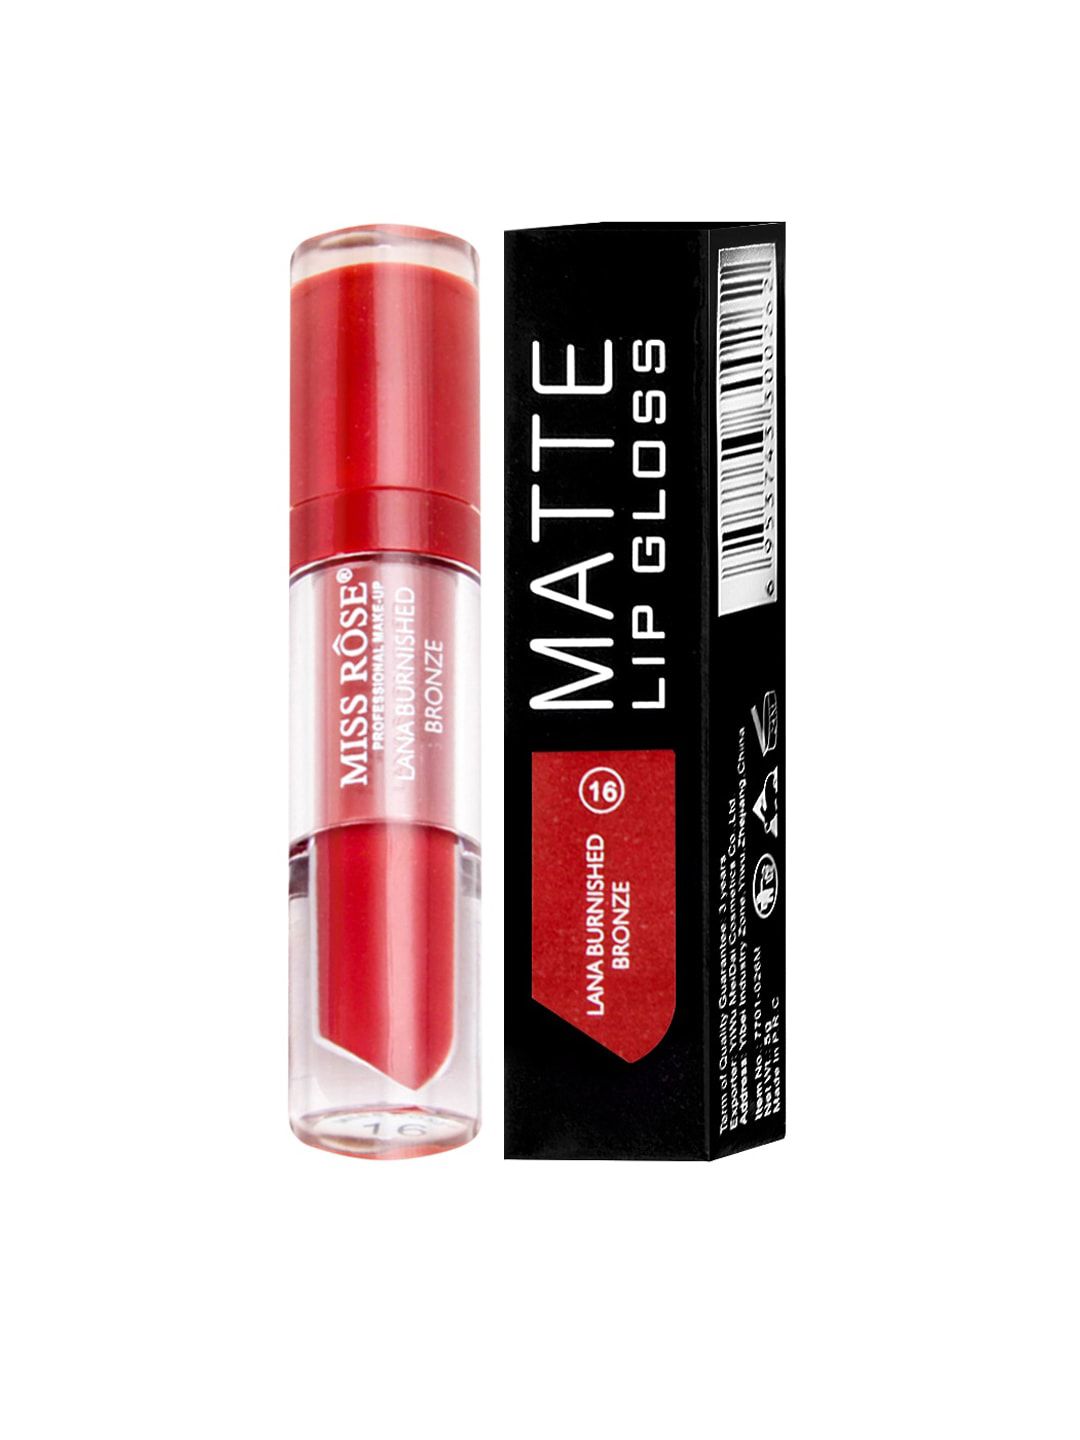 MISS ROSE Matte LipGloss Lana Burnished Bronze 7701-026M 16 20 gm Price in India